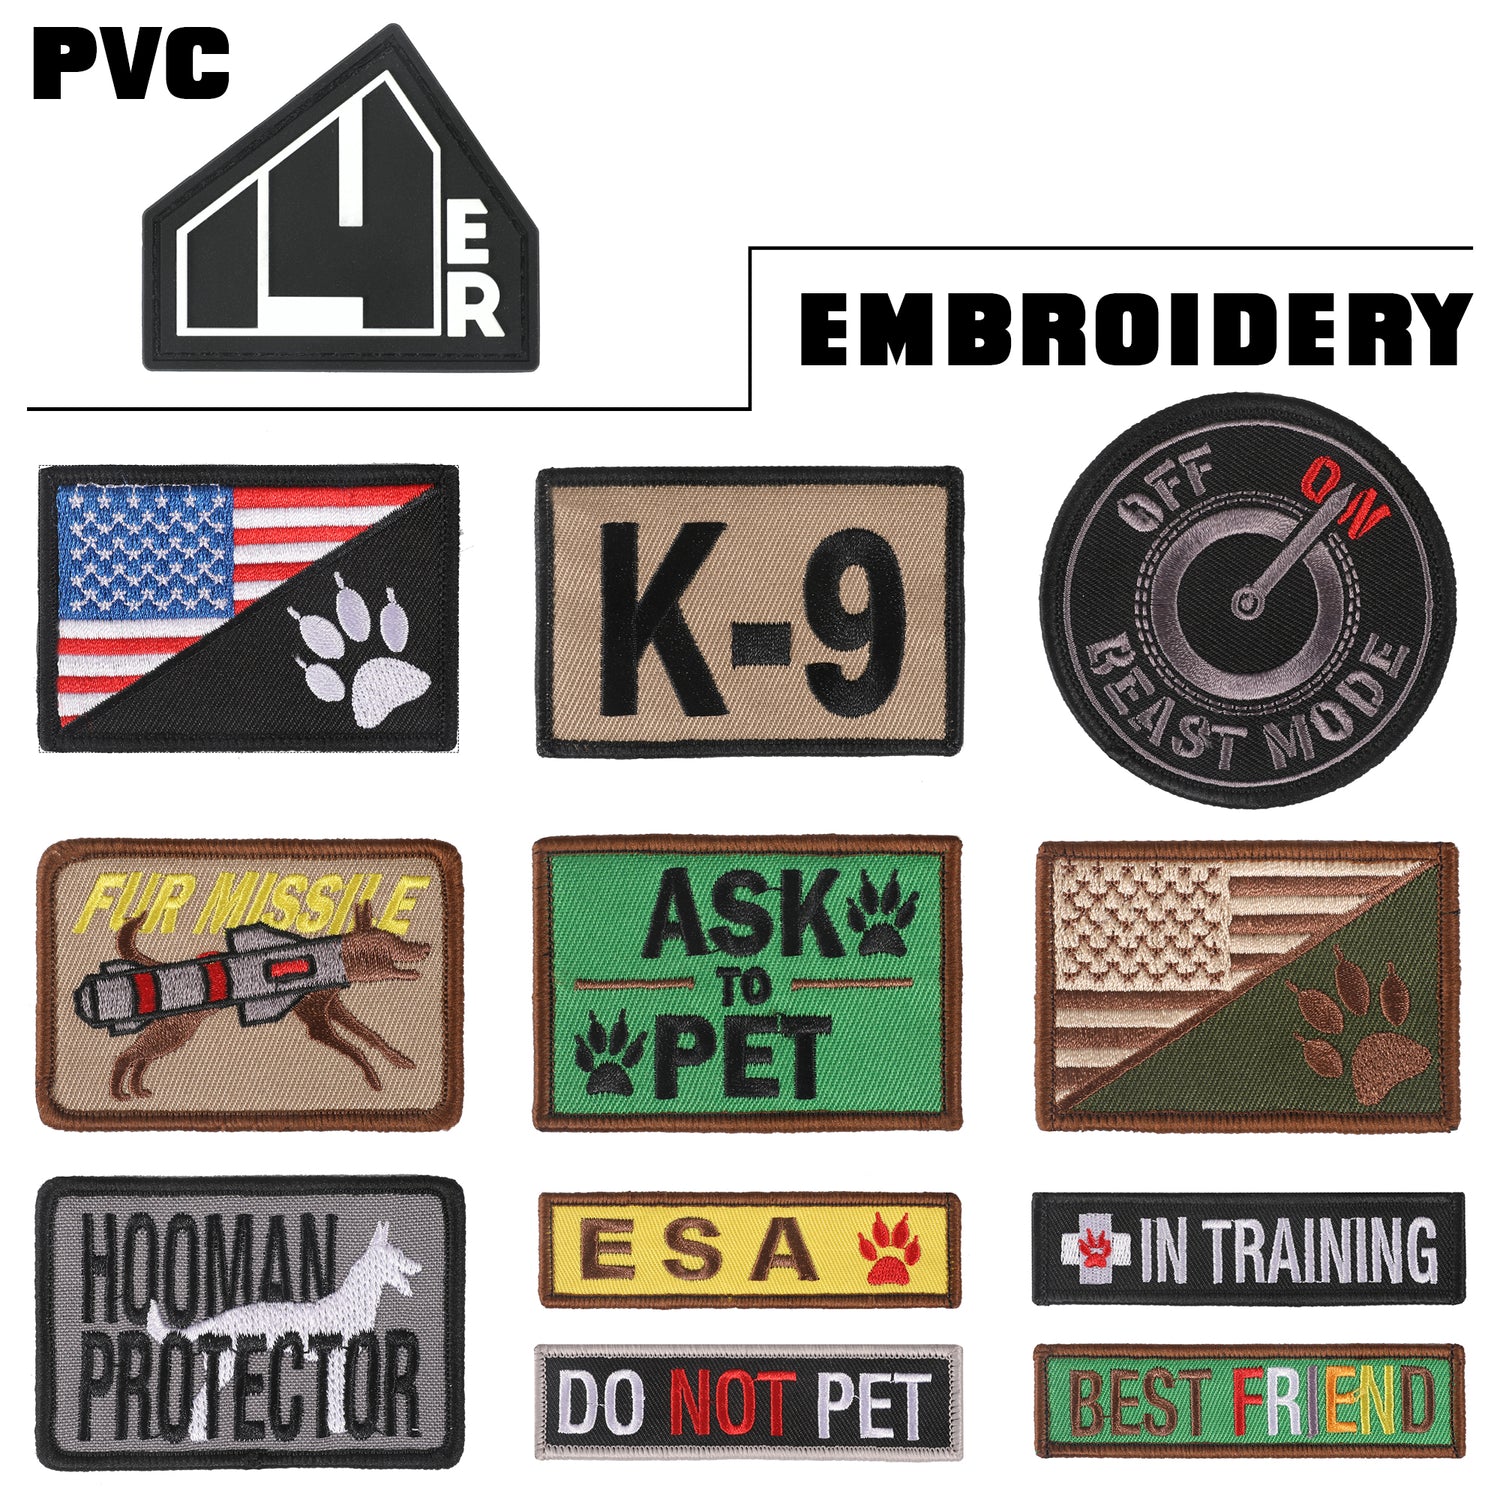 Service Dogs Embroidery Hook Loop Patches K9 Dog Paw Emblem